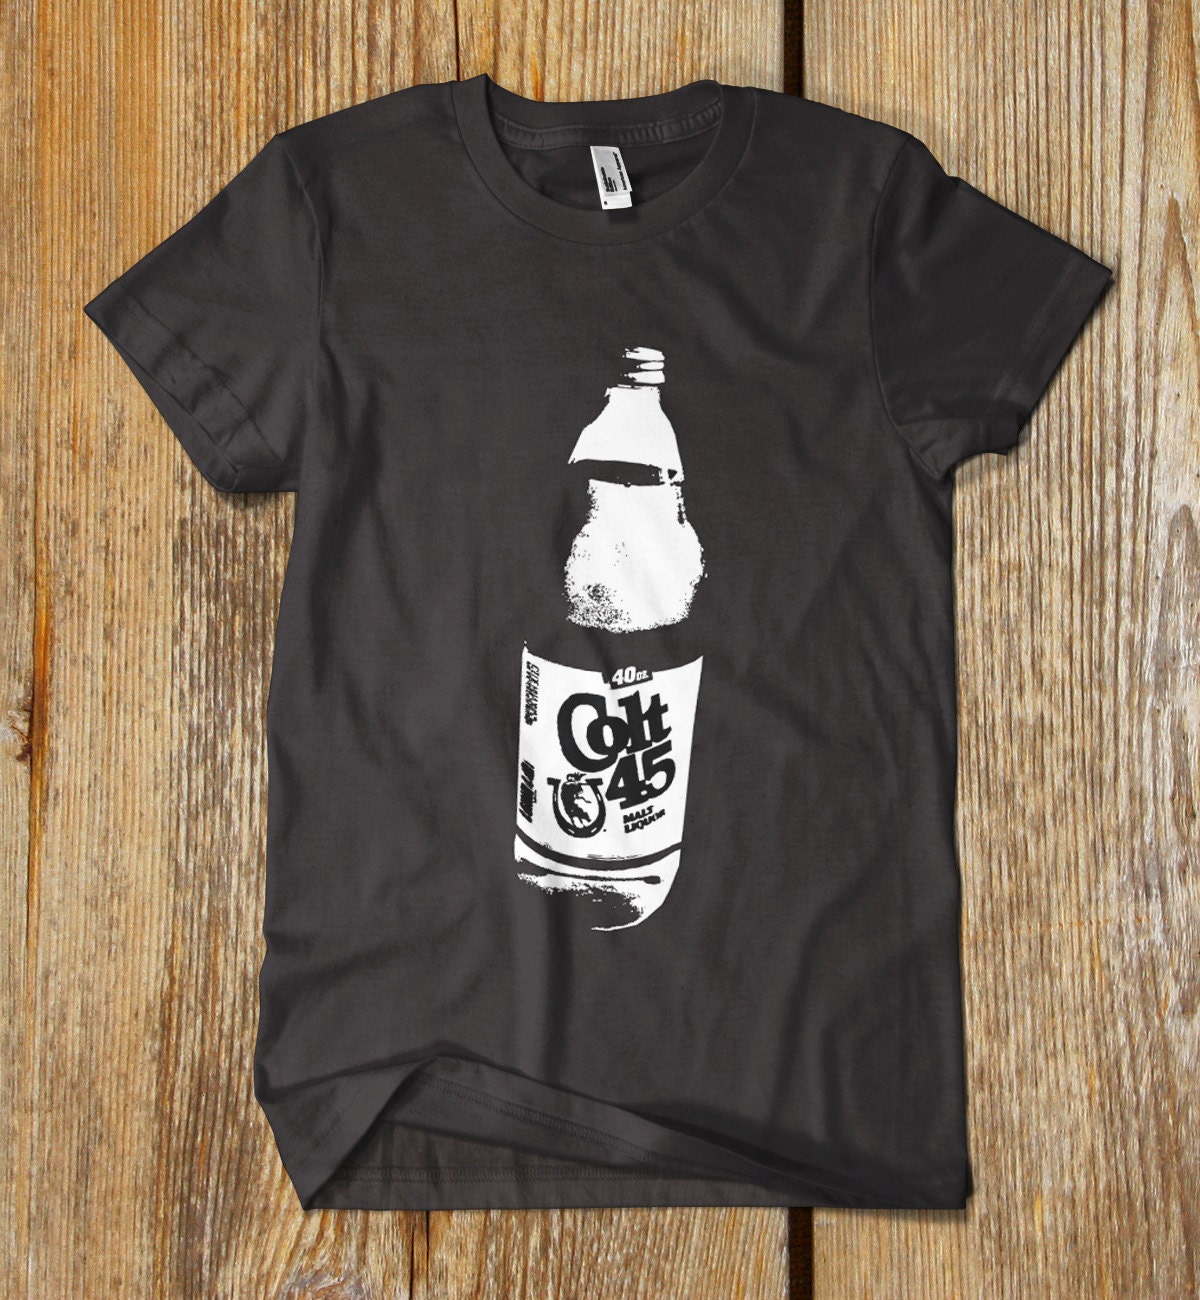 CUSTOM printed Colt 45 t shirt. One of a kind by DISTINKTTEES